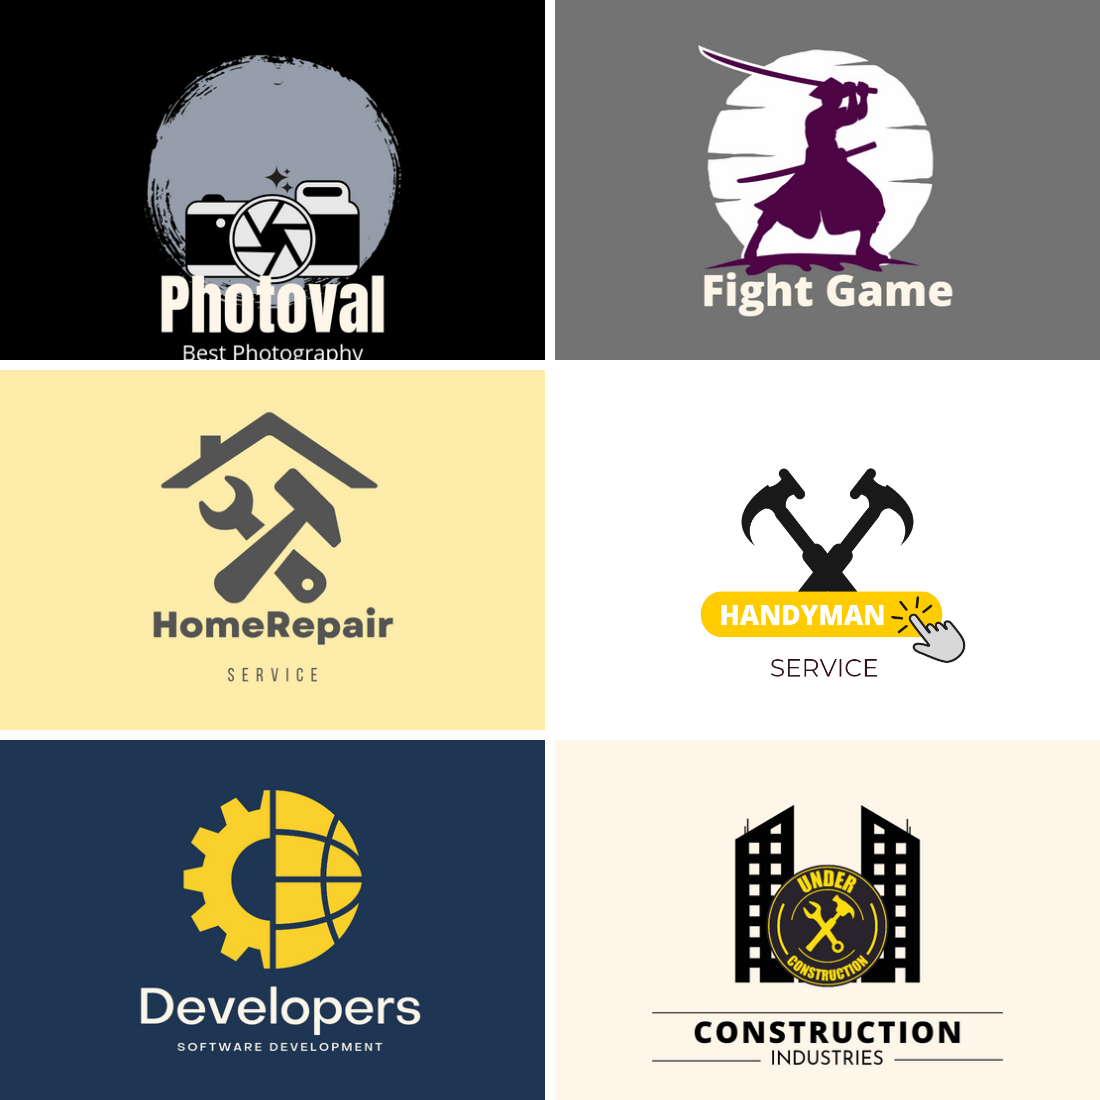 6 Architectural Logos Cover Image.